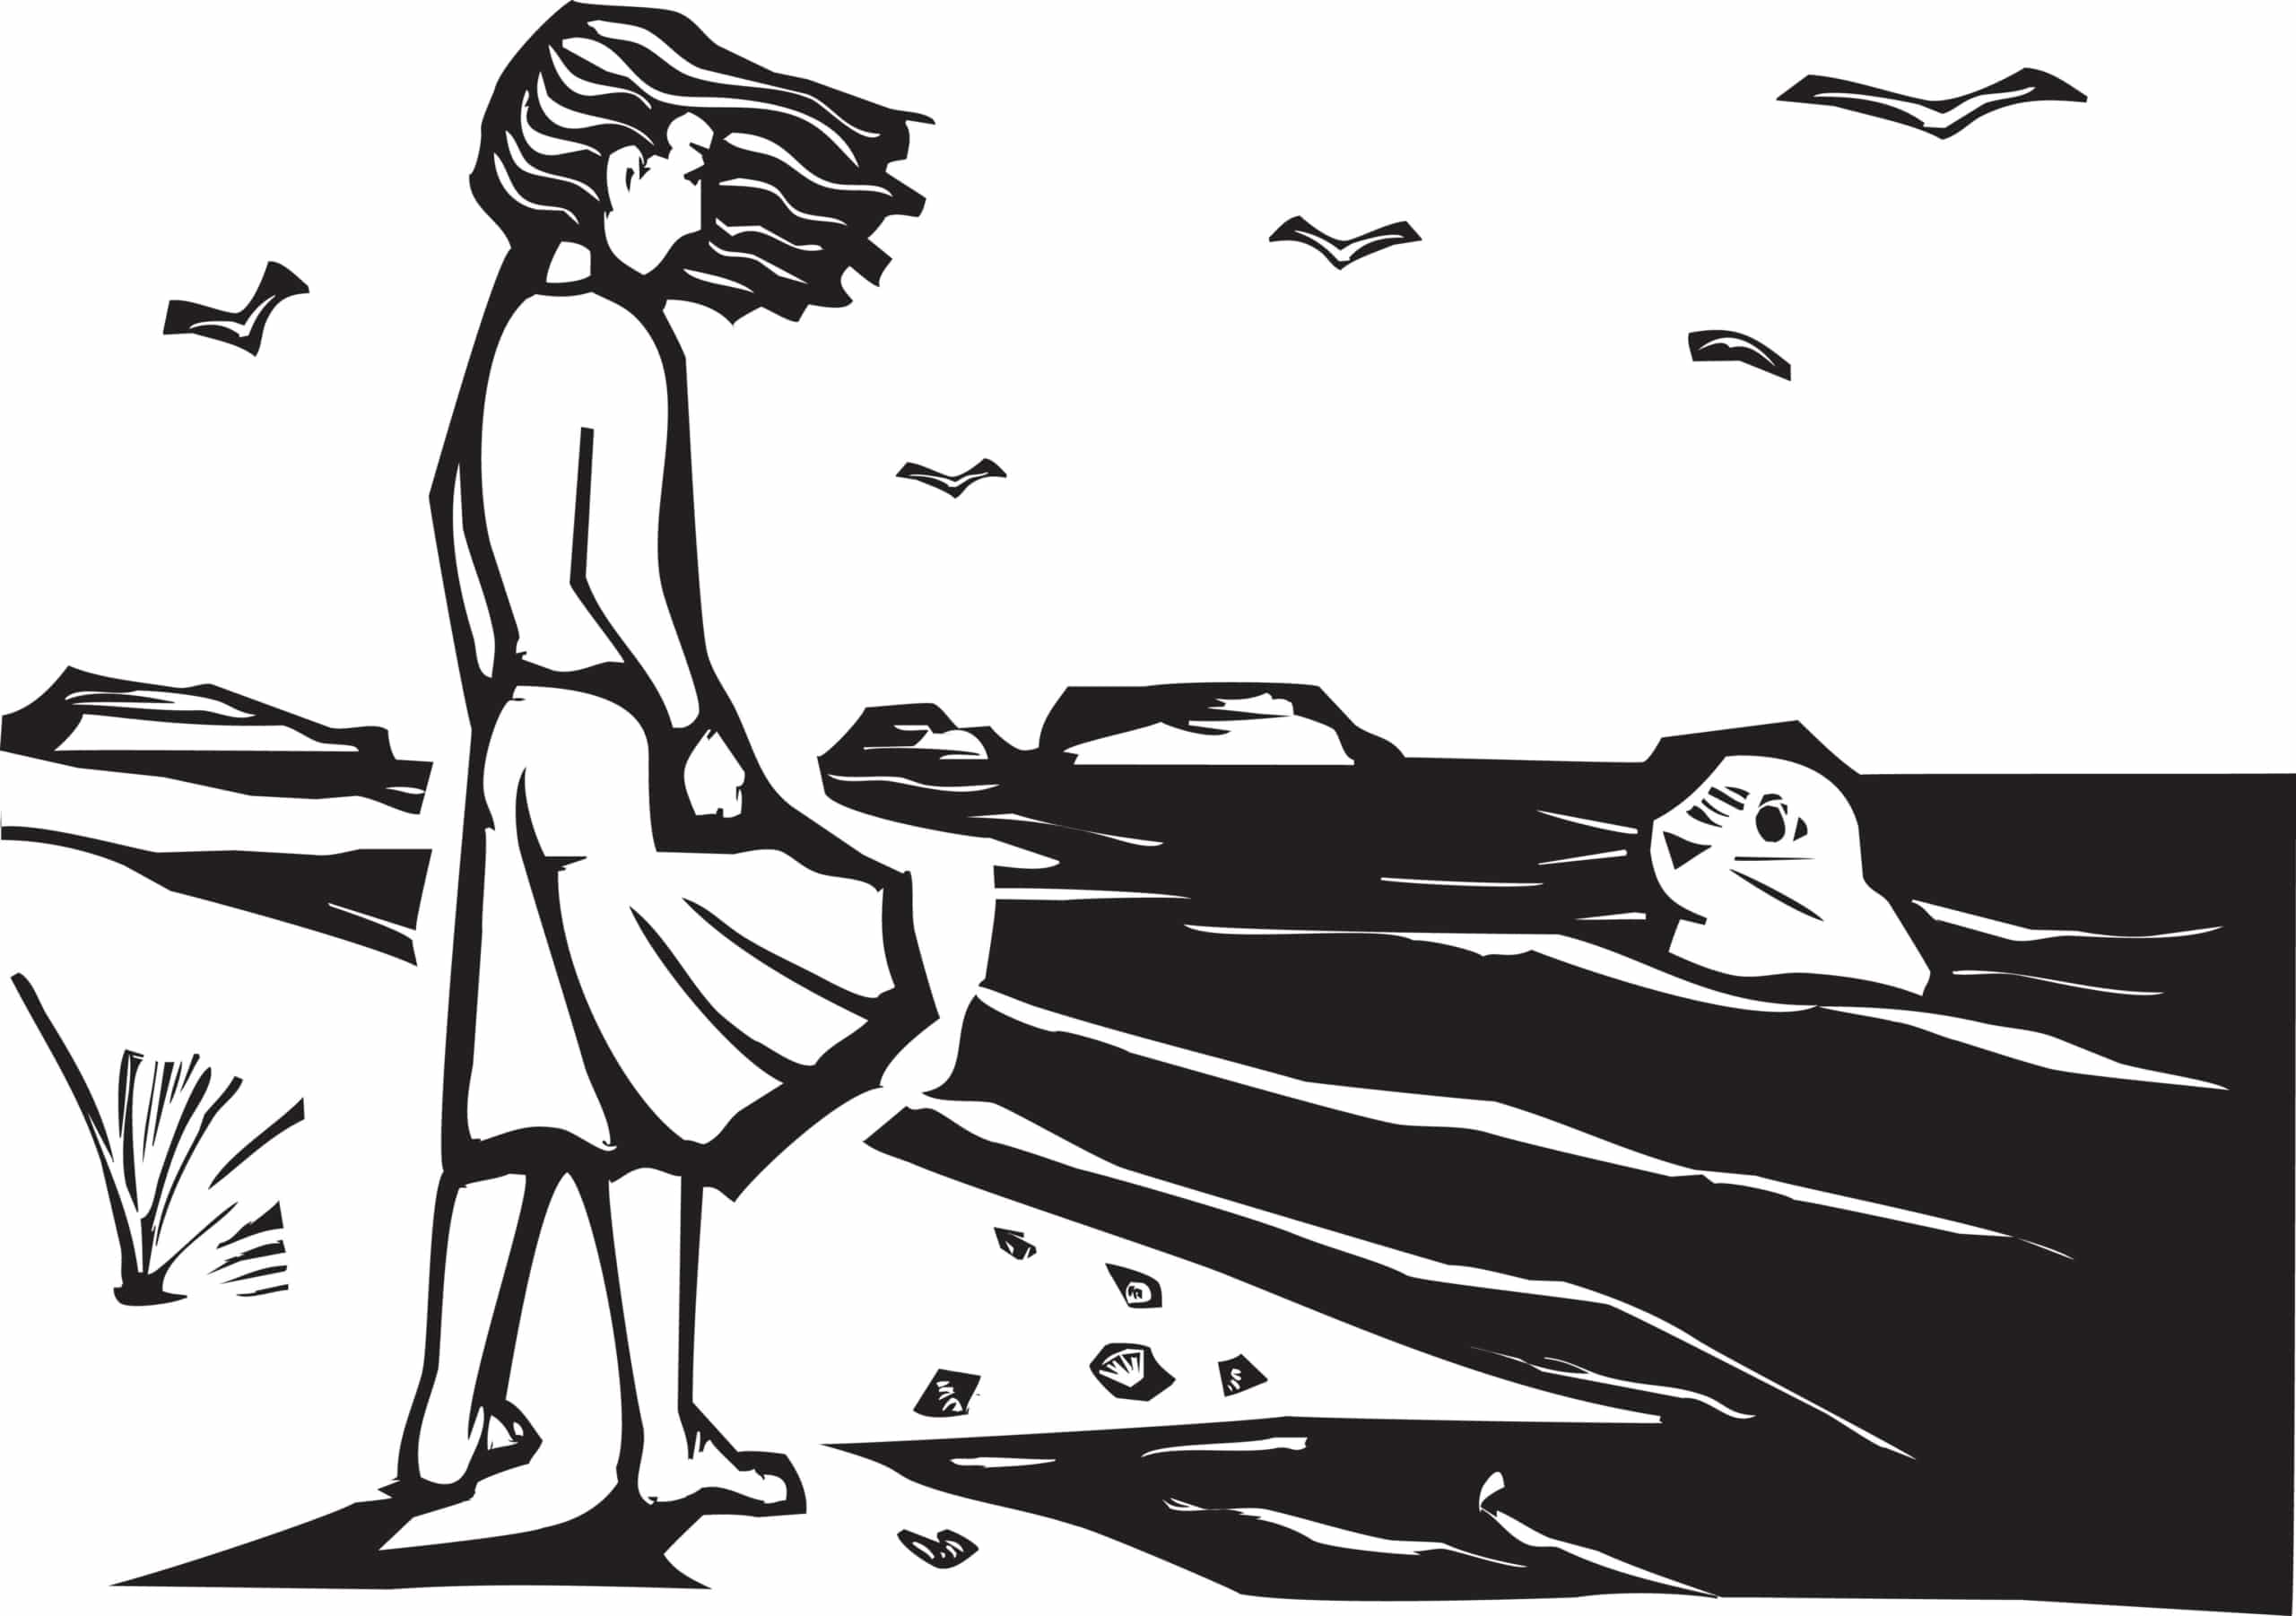 A drawing of a Scottish Selkie, or seal person